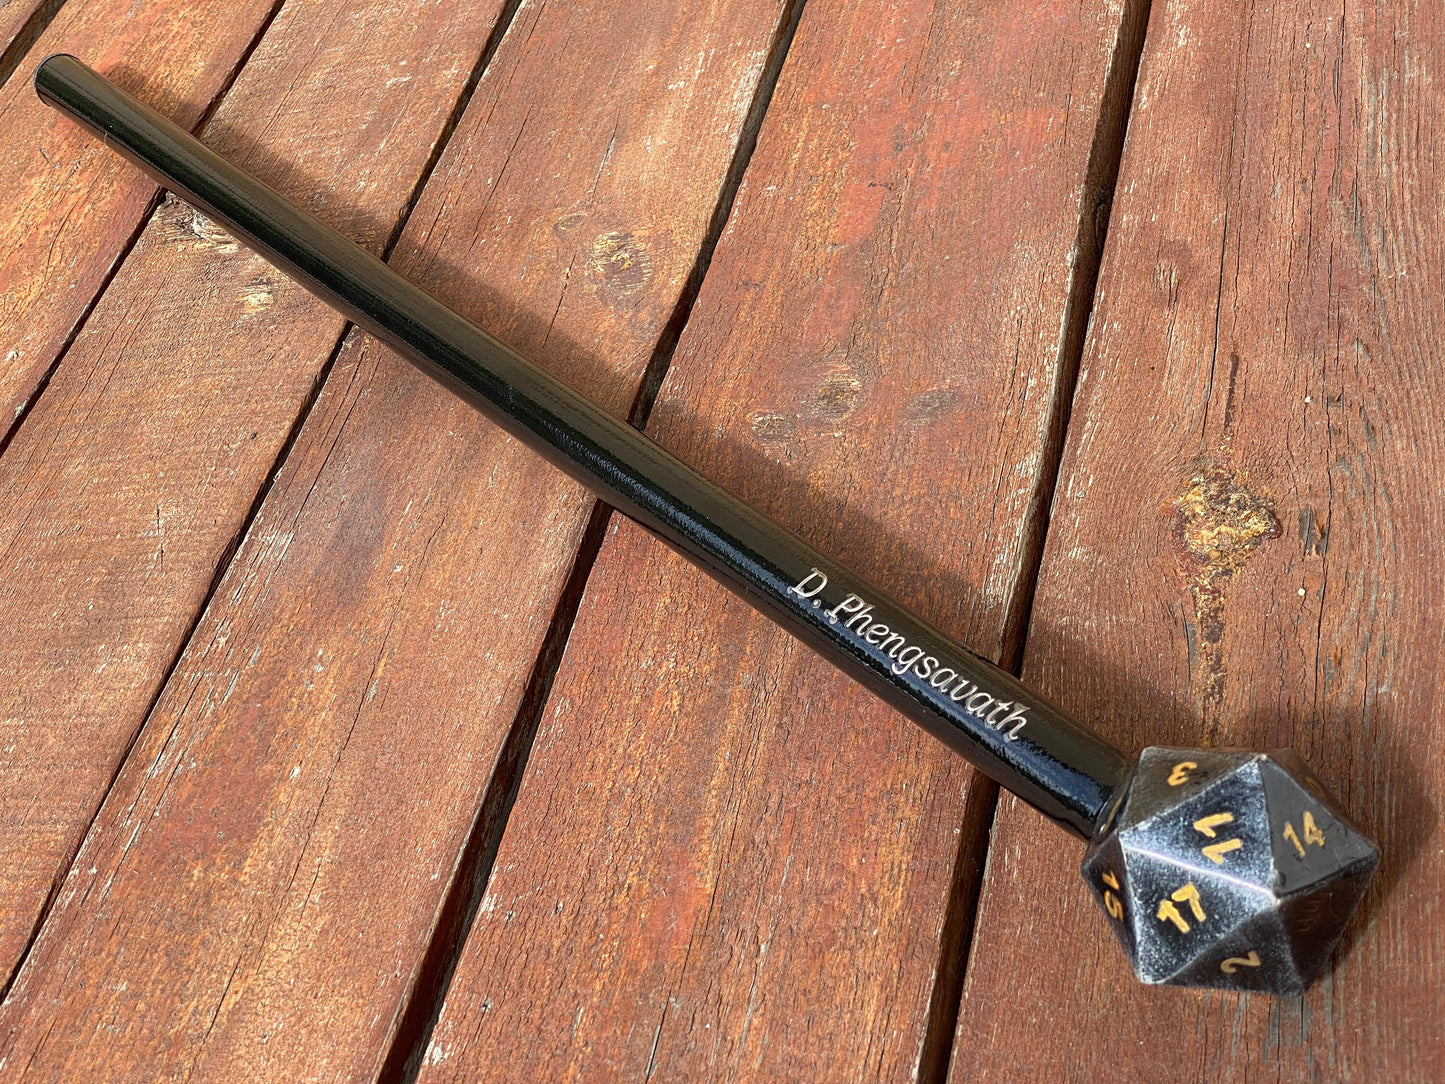 Dice cane, walking cane, dice, walking stick, gamer gift, personalized cane, birthday, Christmas, anniversary, retirement gift, funny gift